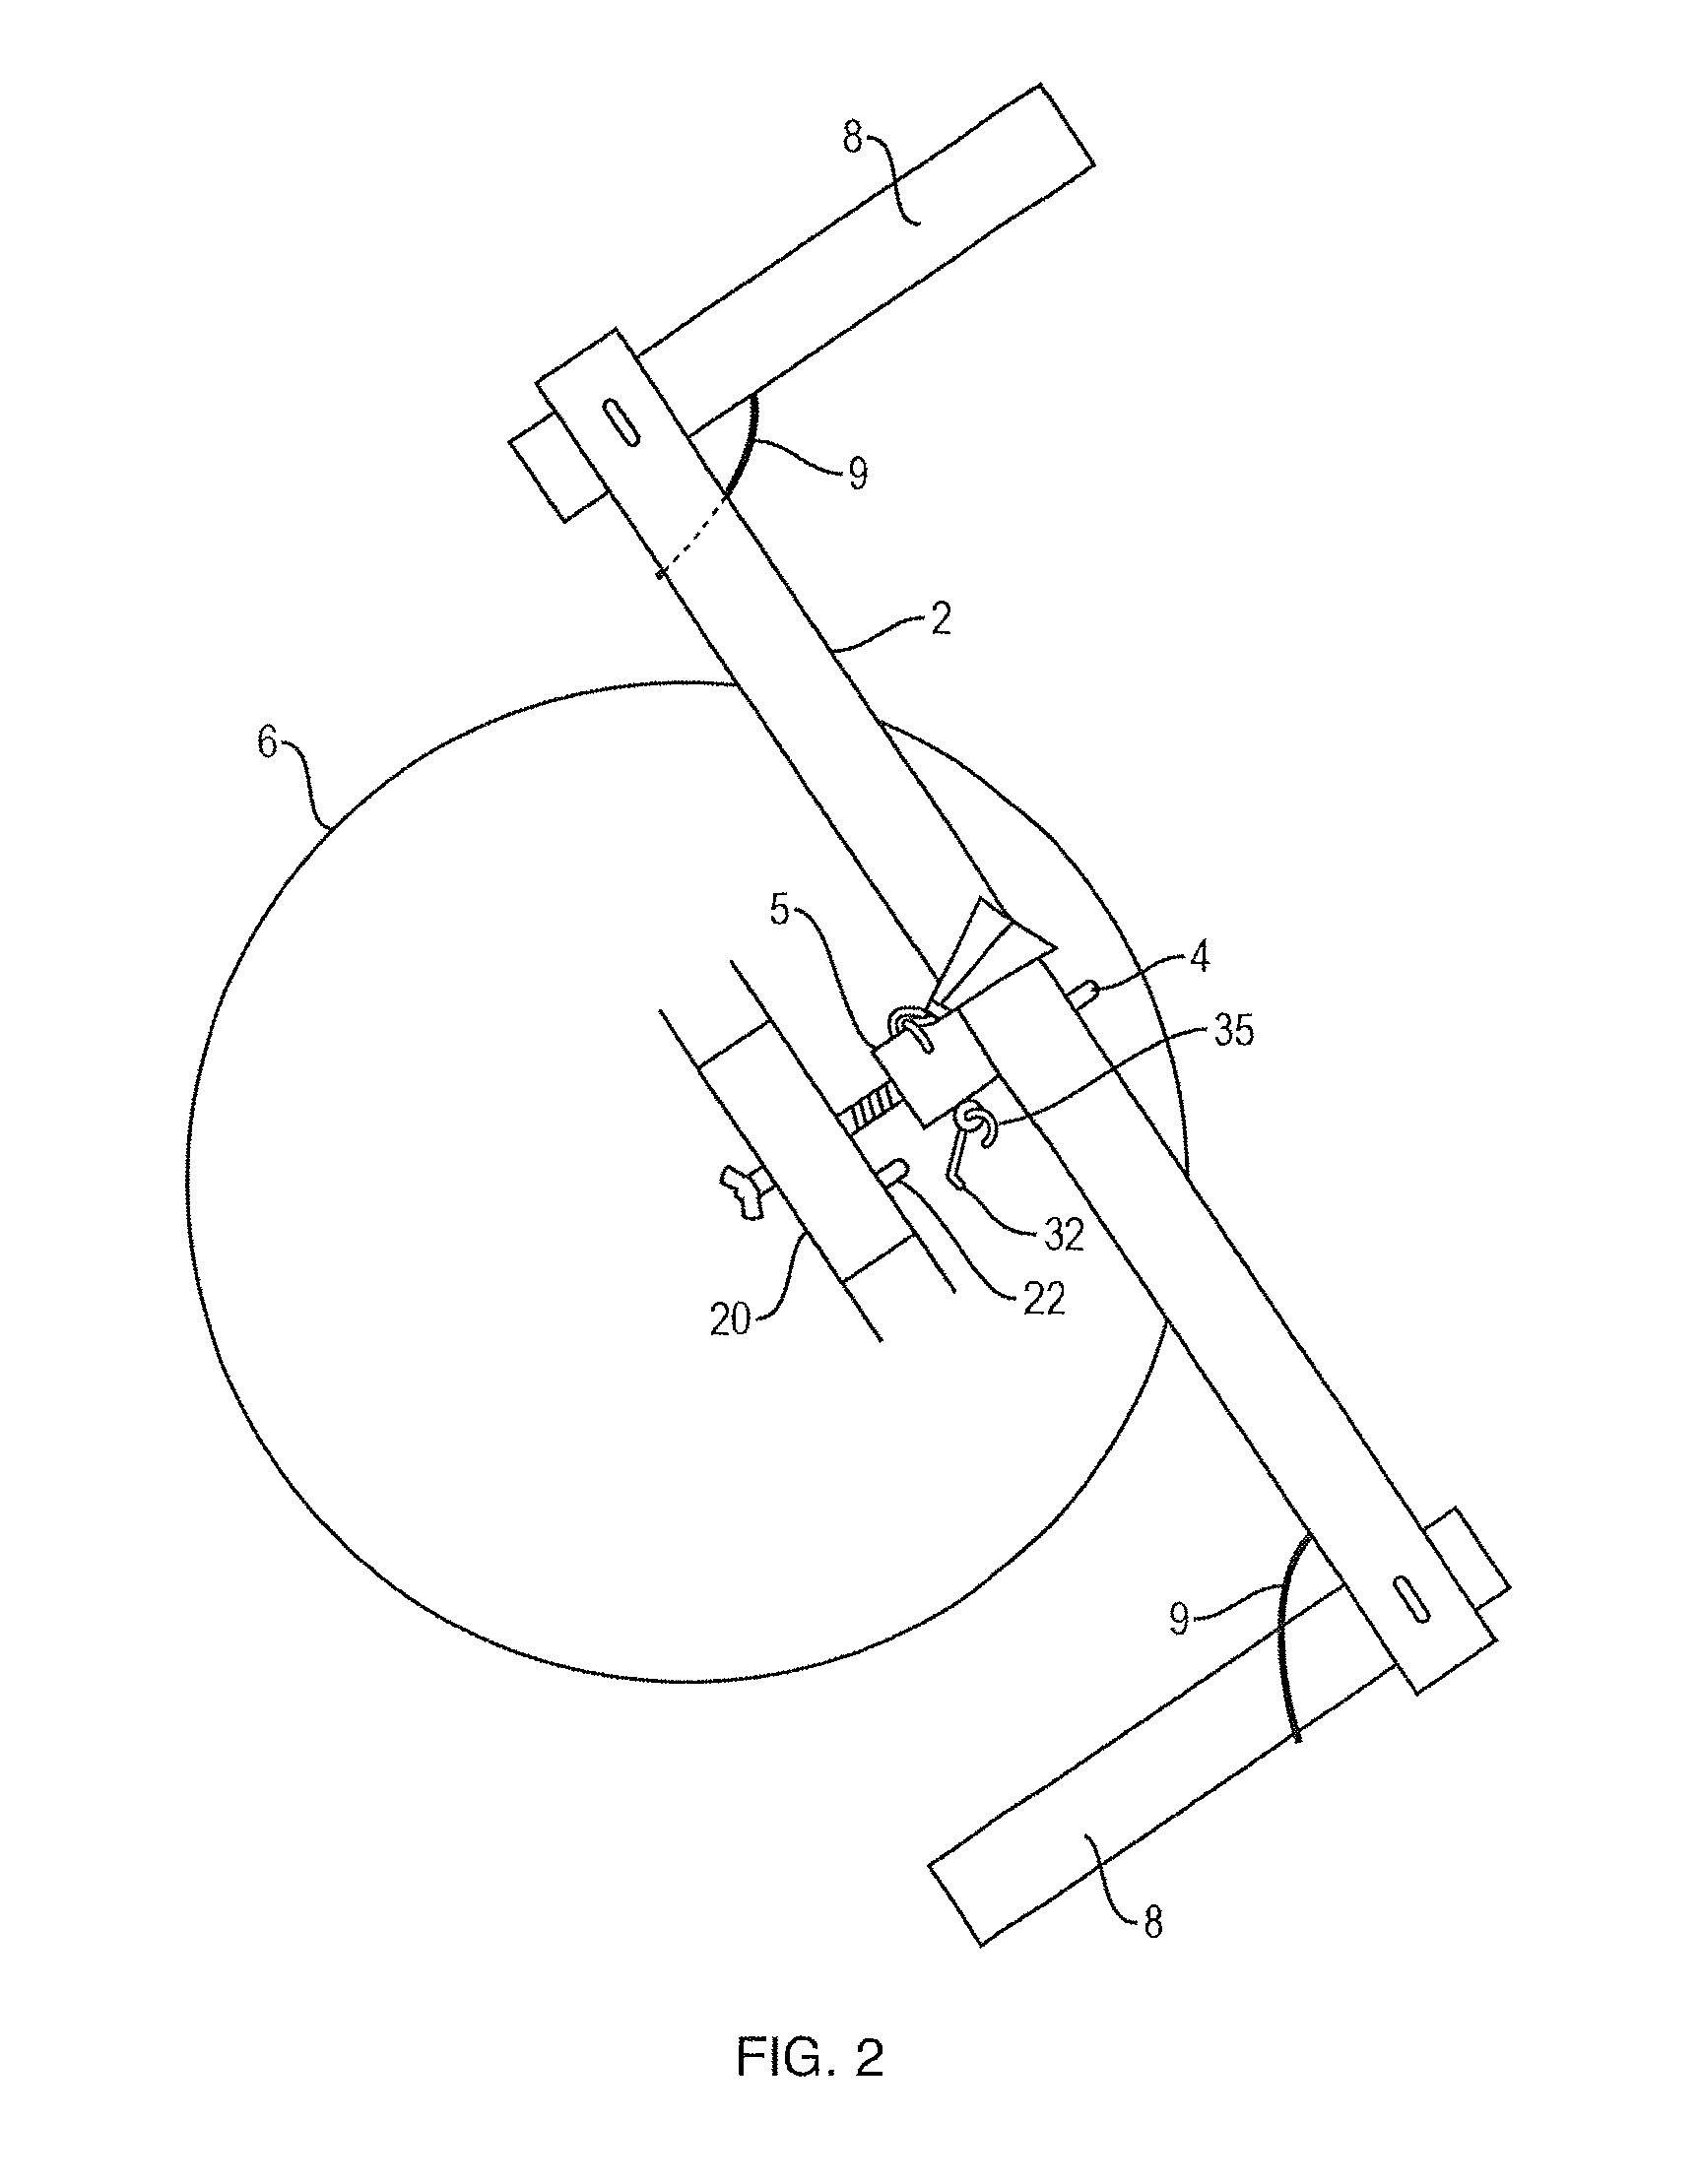 Apparatus for controlling the release of a tip-up signal indicator for a trap